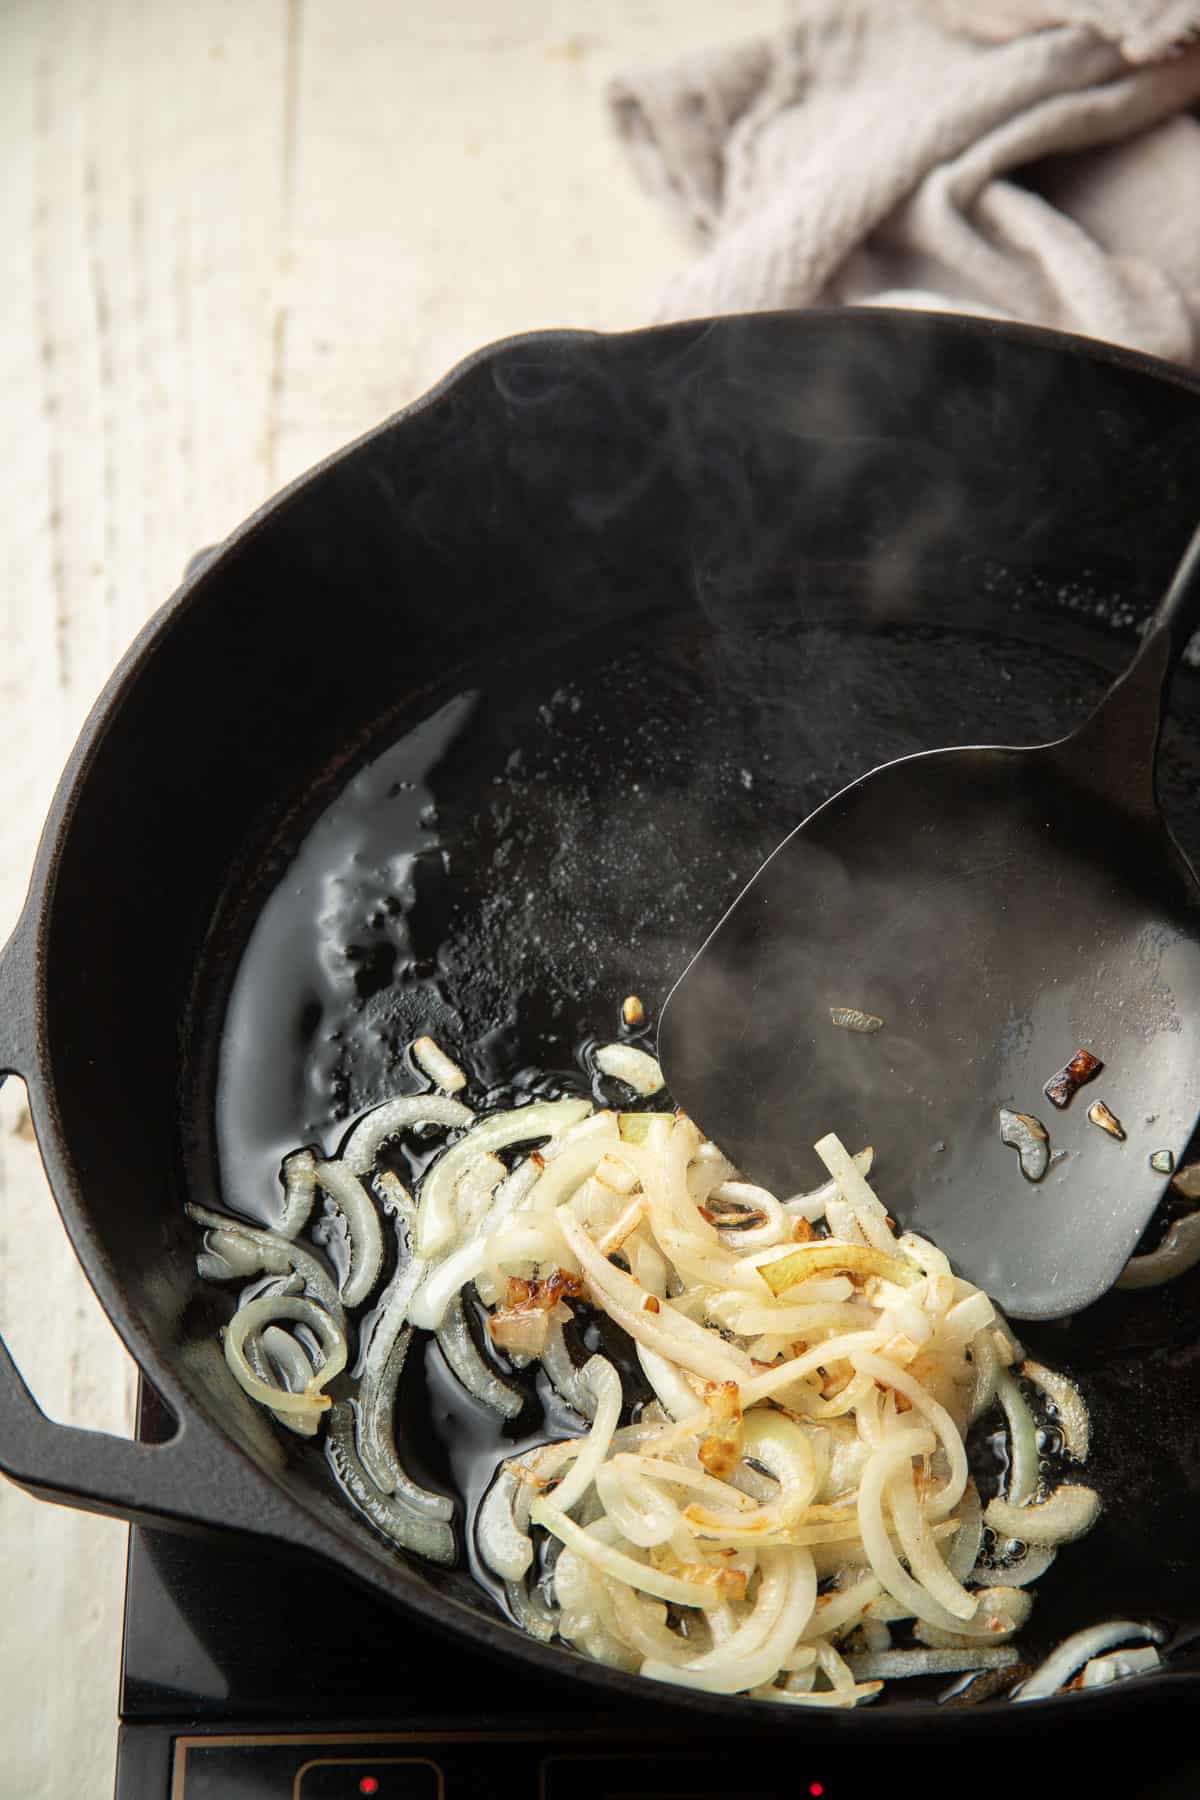 Onions cooking in oil in a skillet.